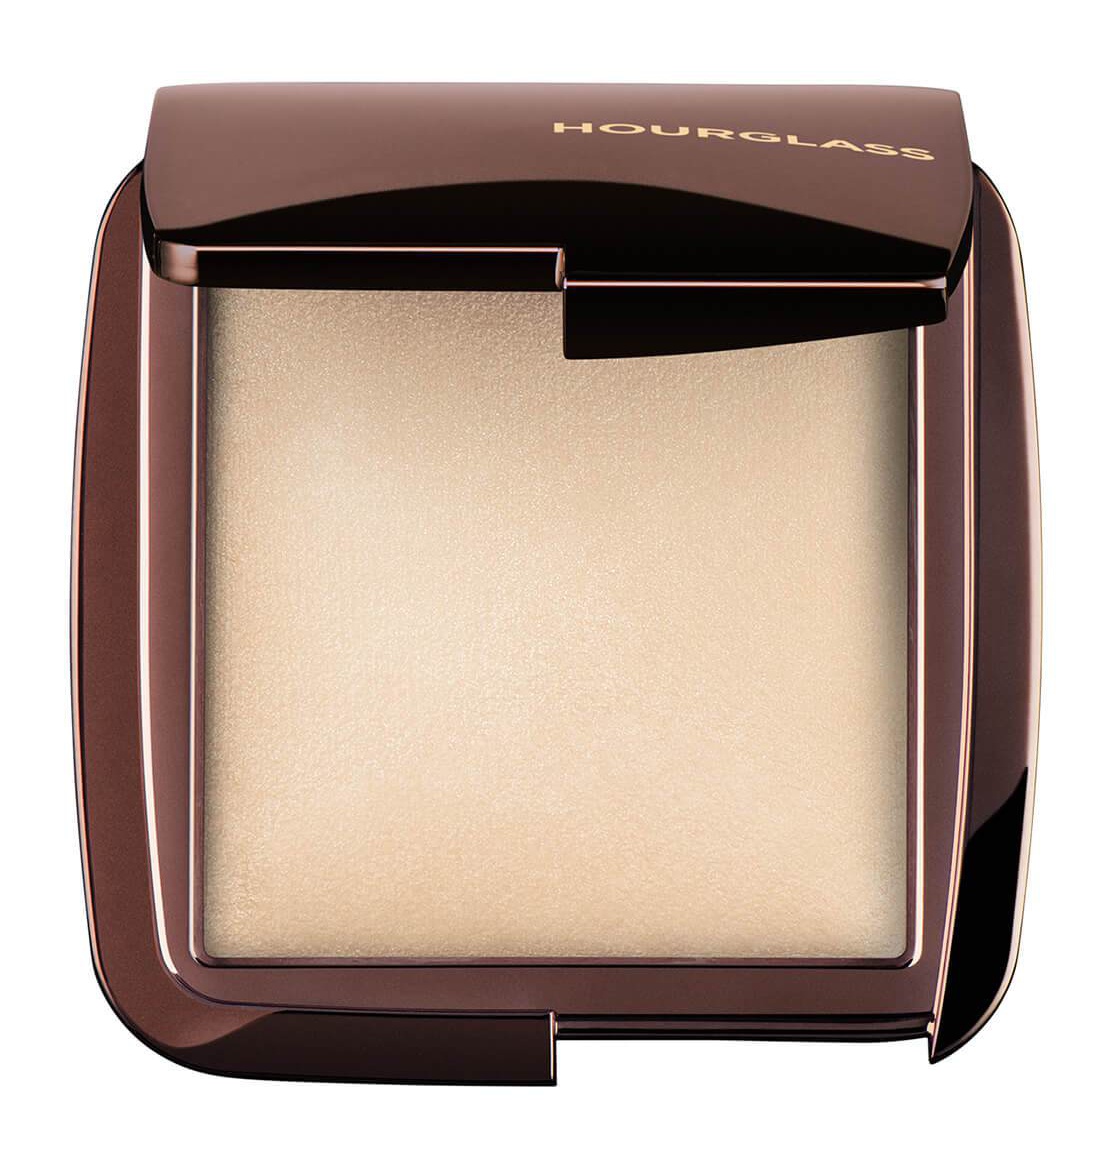 Hourglass Ambient™ Lighting Finishing Powder - Diffused Light